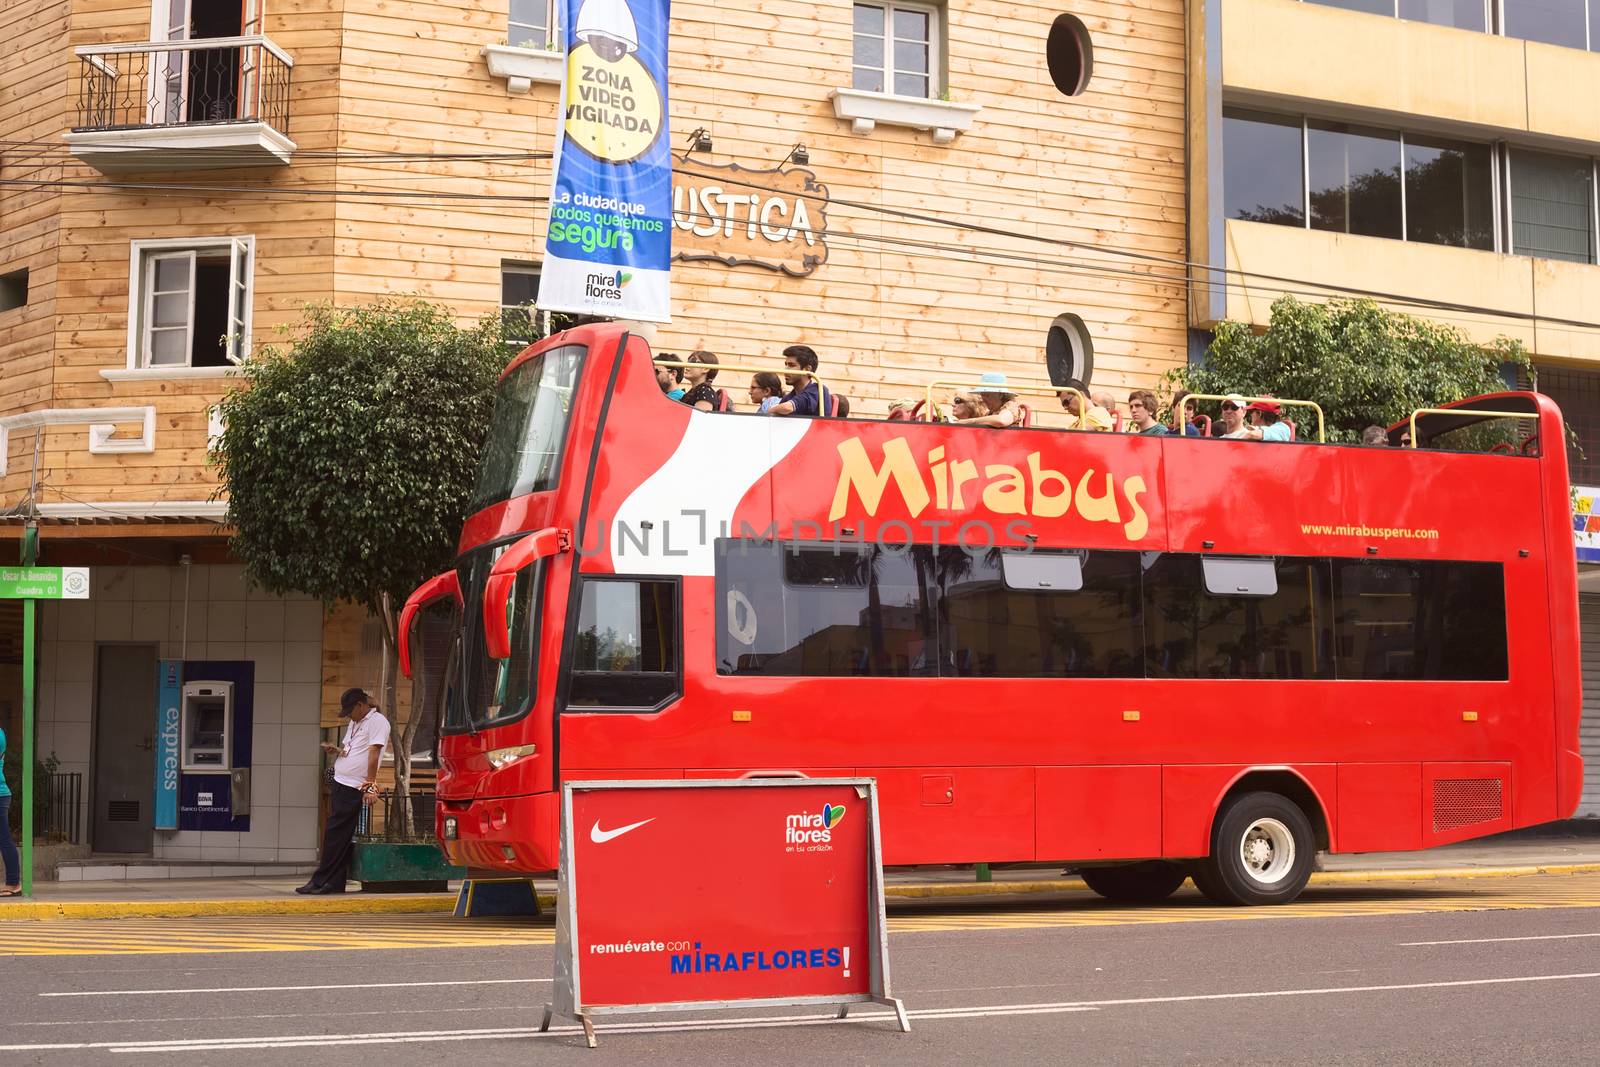 LIMA, PERU - APRIL 1, 2012: Unidentified people on Mirabus sightseeing bus in front of the restaurant Rustica on Av. Diagonal in Miraflores on April 1, 2012 in Lima, Peru. Miraflores is the tourist district of Lima, with a lot of infrastructure for tourism.